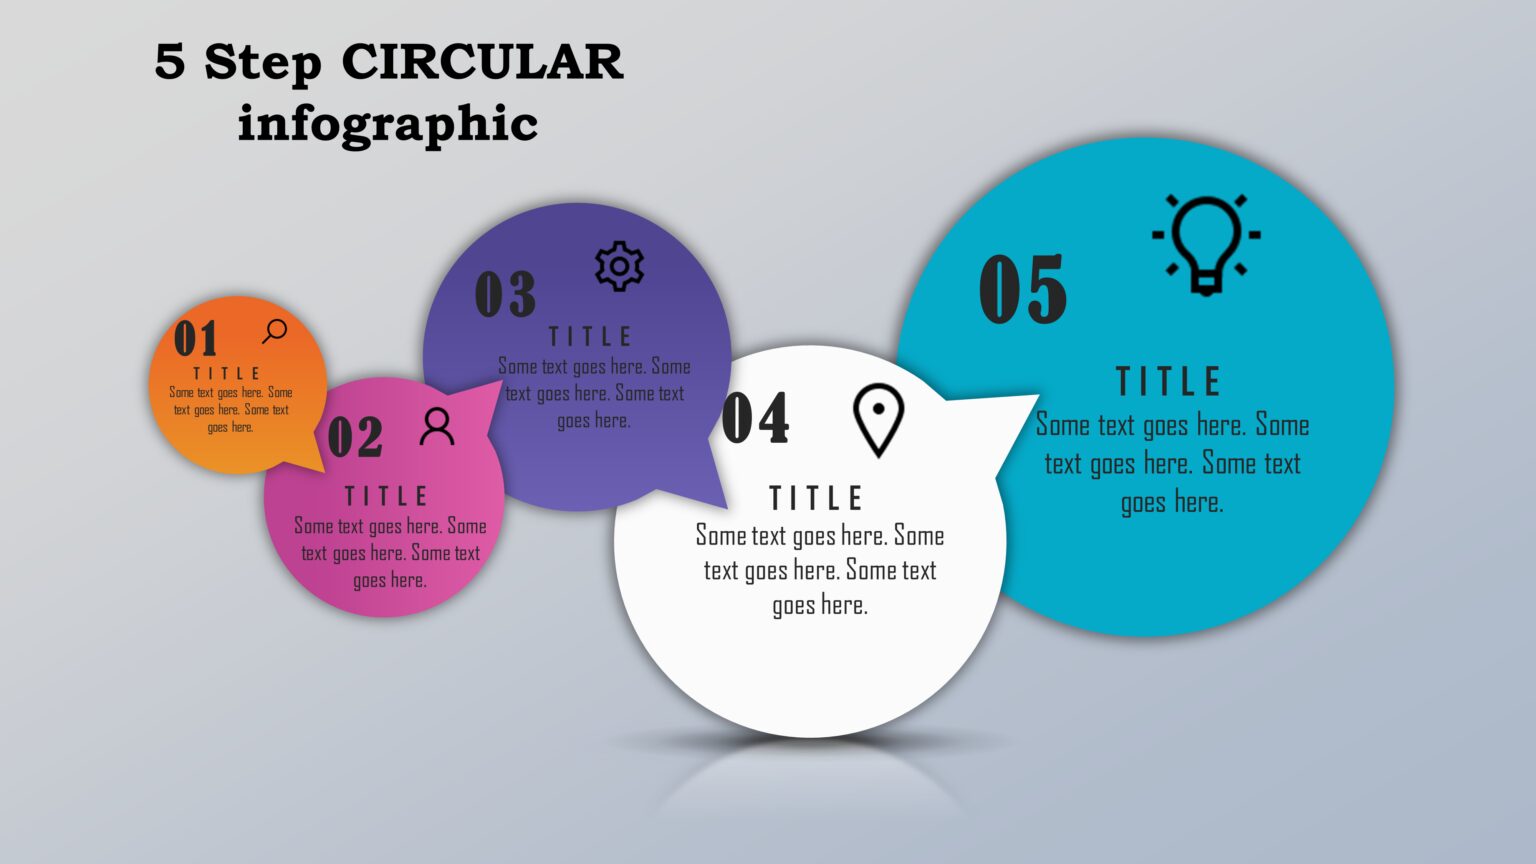 17powerpoint 5 Step Circular Infographic Powerup With Powerpoint 6728